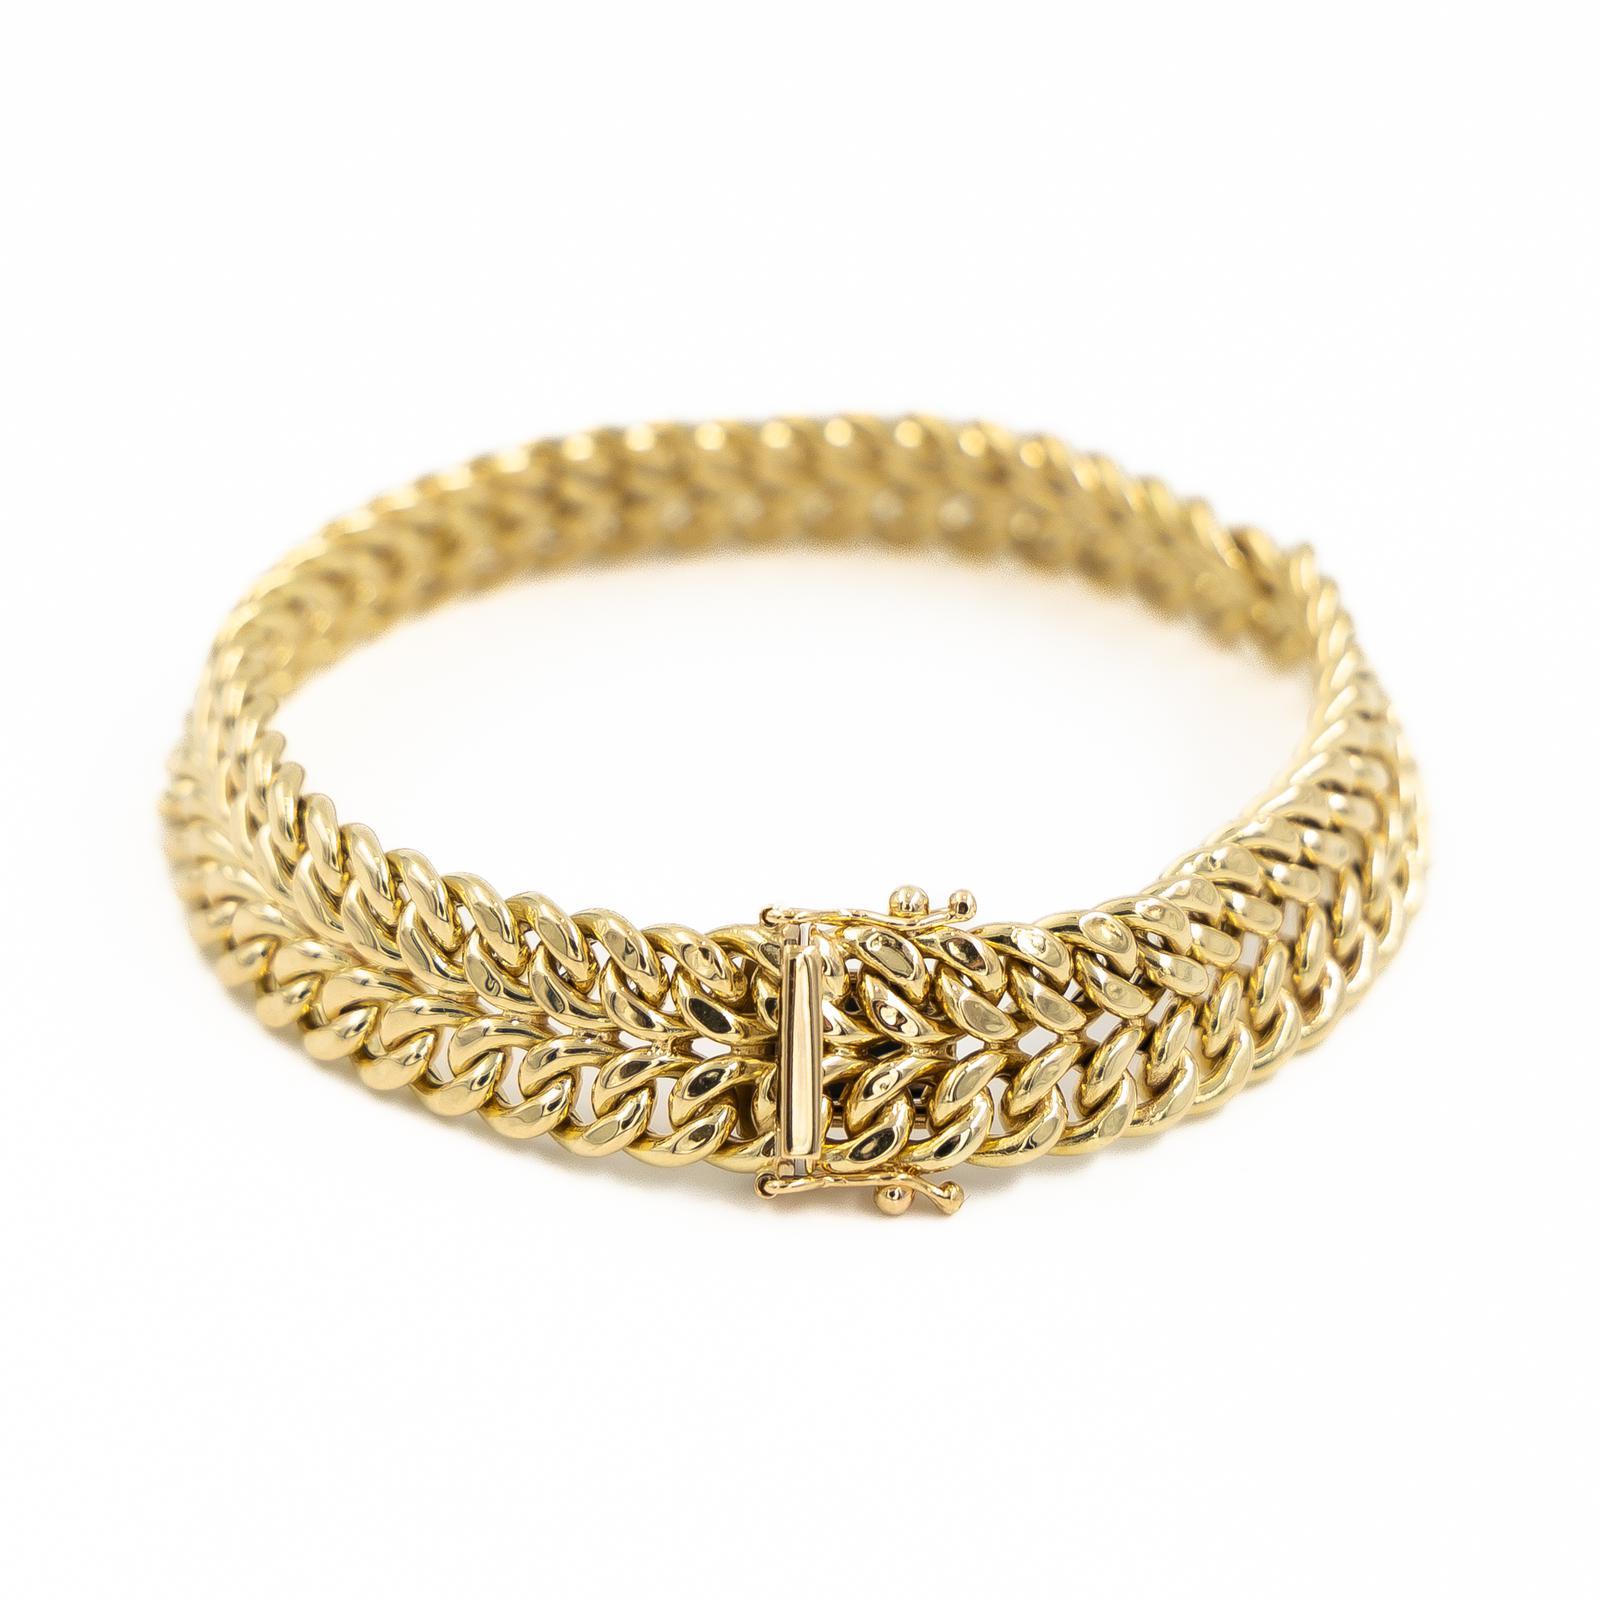 Bracelet in yellow gold 750 thousandths (18 carats). mesh 8. Length: 19 cm. Width: 1.2 cm. Double eight of safety. Total weight: 17.28 g. Owl hallmark. Excellent condition
